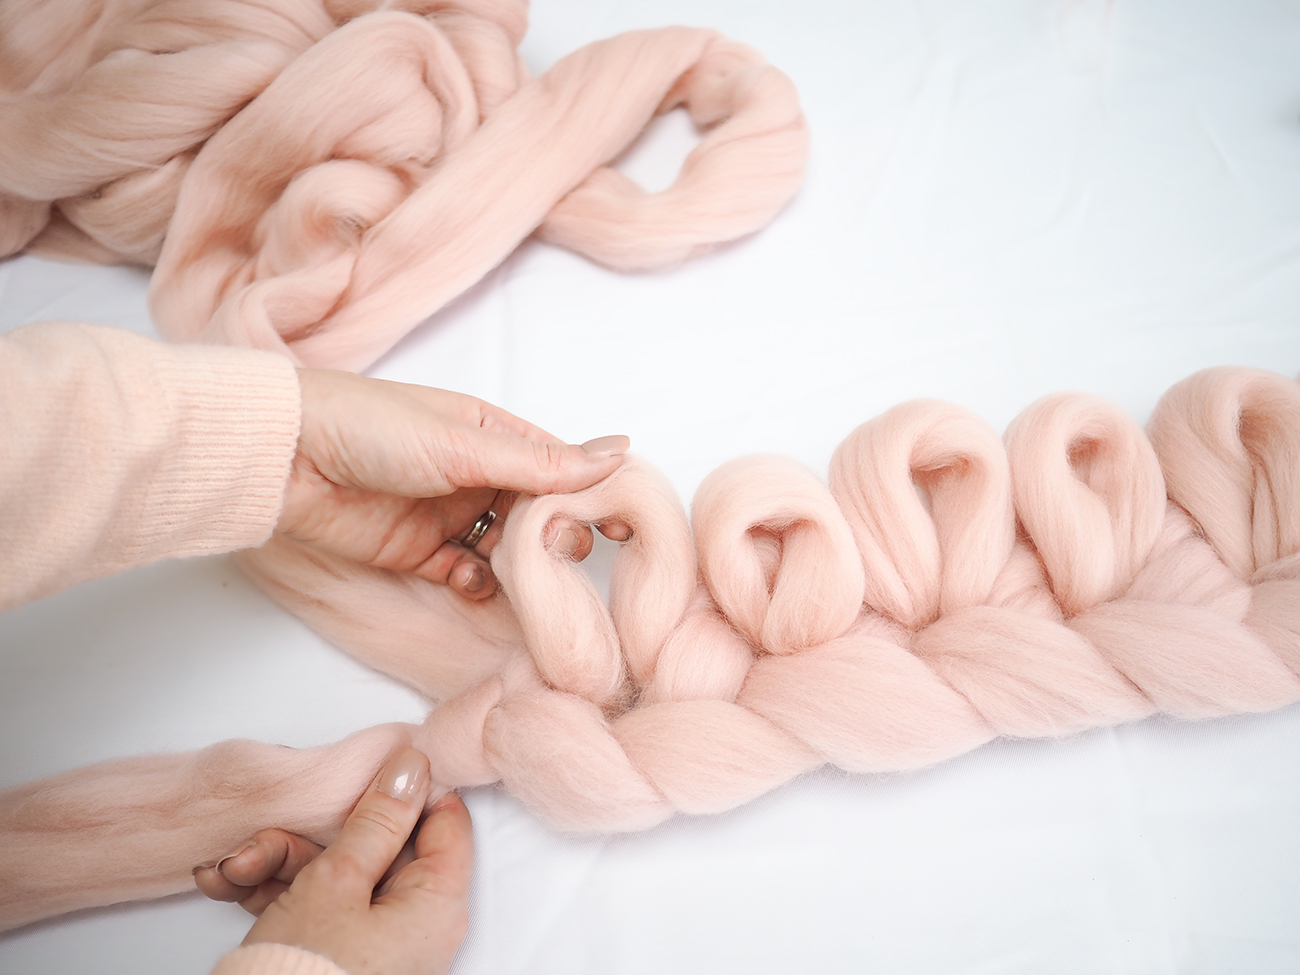 knit your own chunky blanket